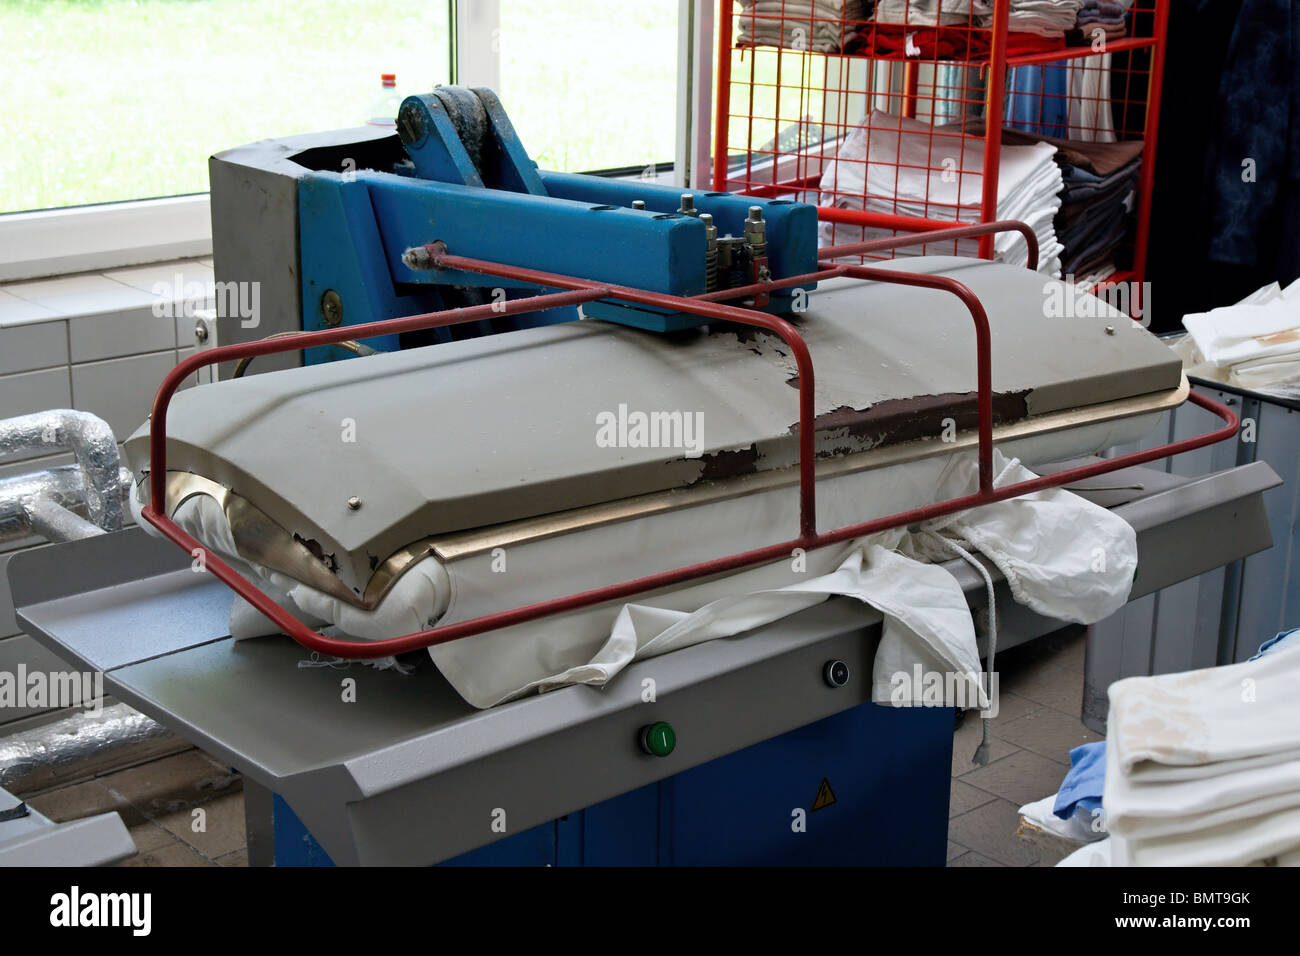 Automatic drying and ironing rolling press Stock Photo